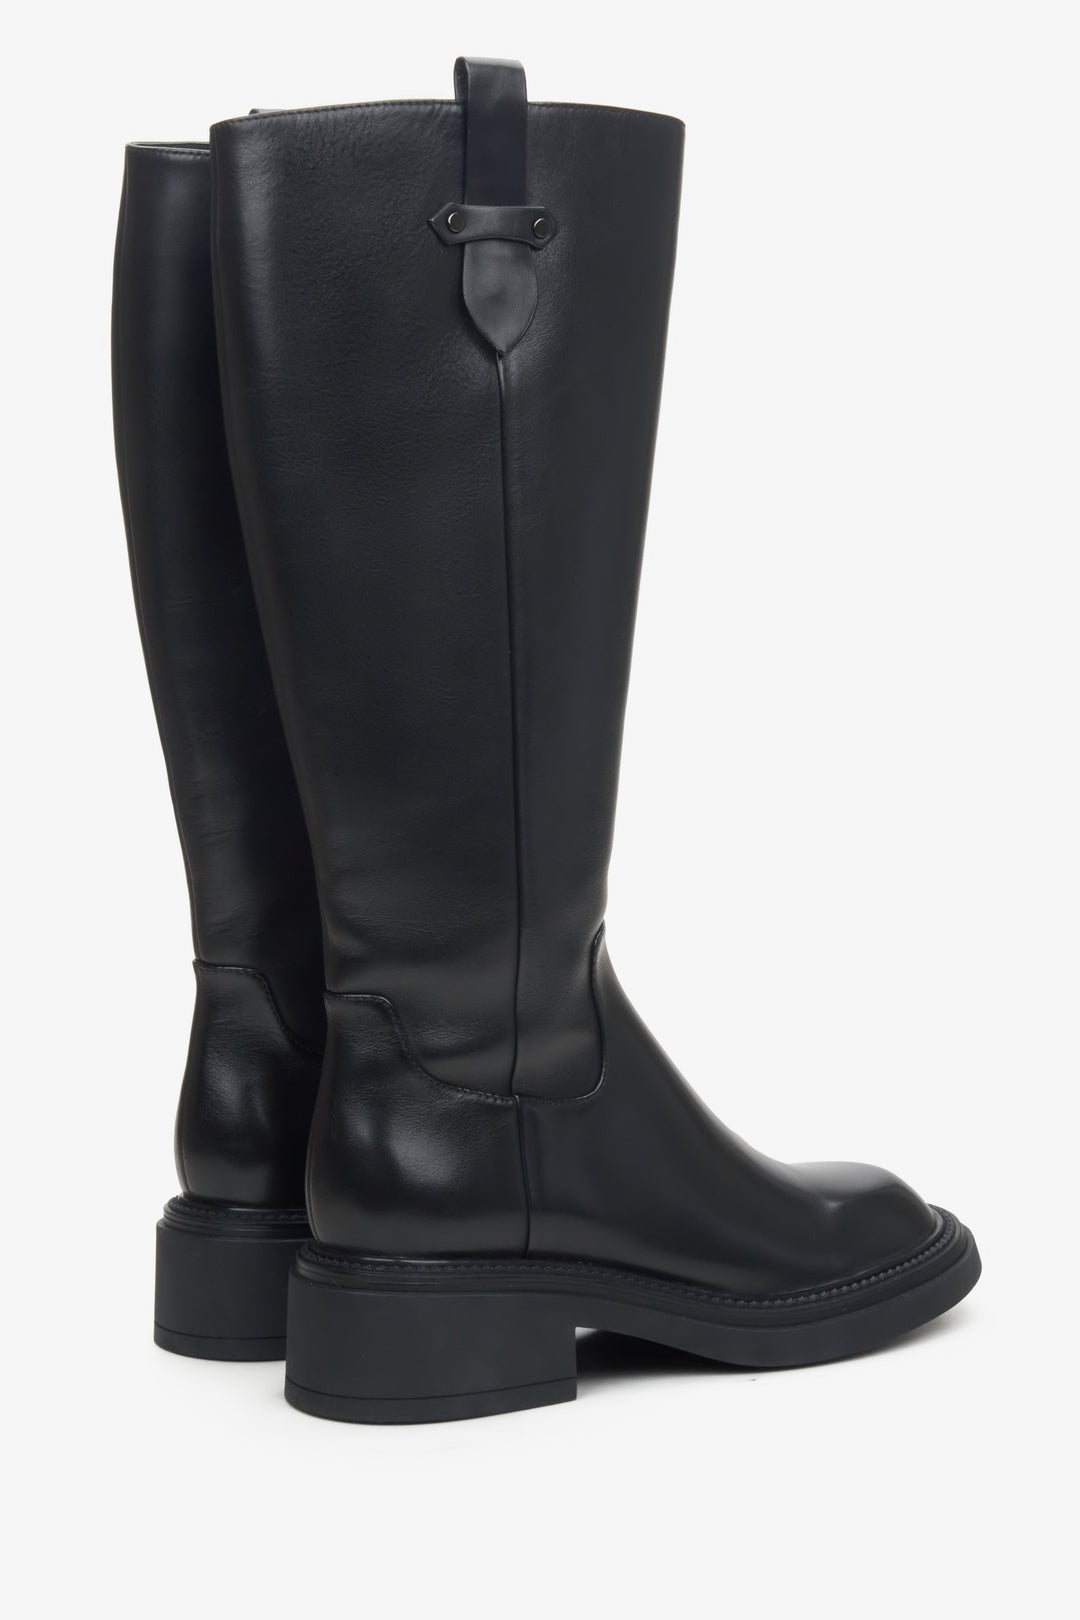 Women's black boots by Estro with a wide shaft - close-up on the side line.